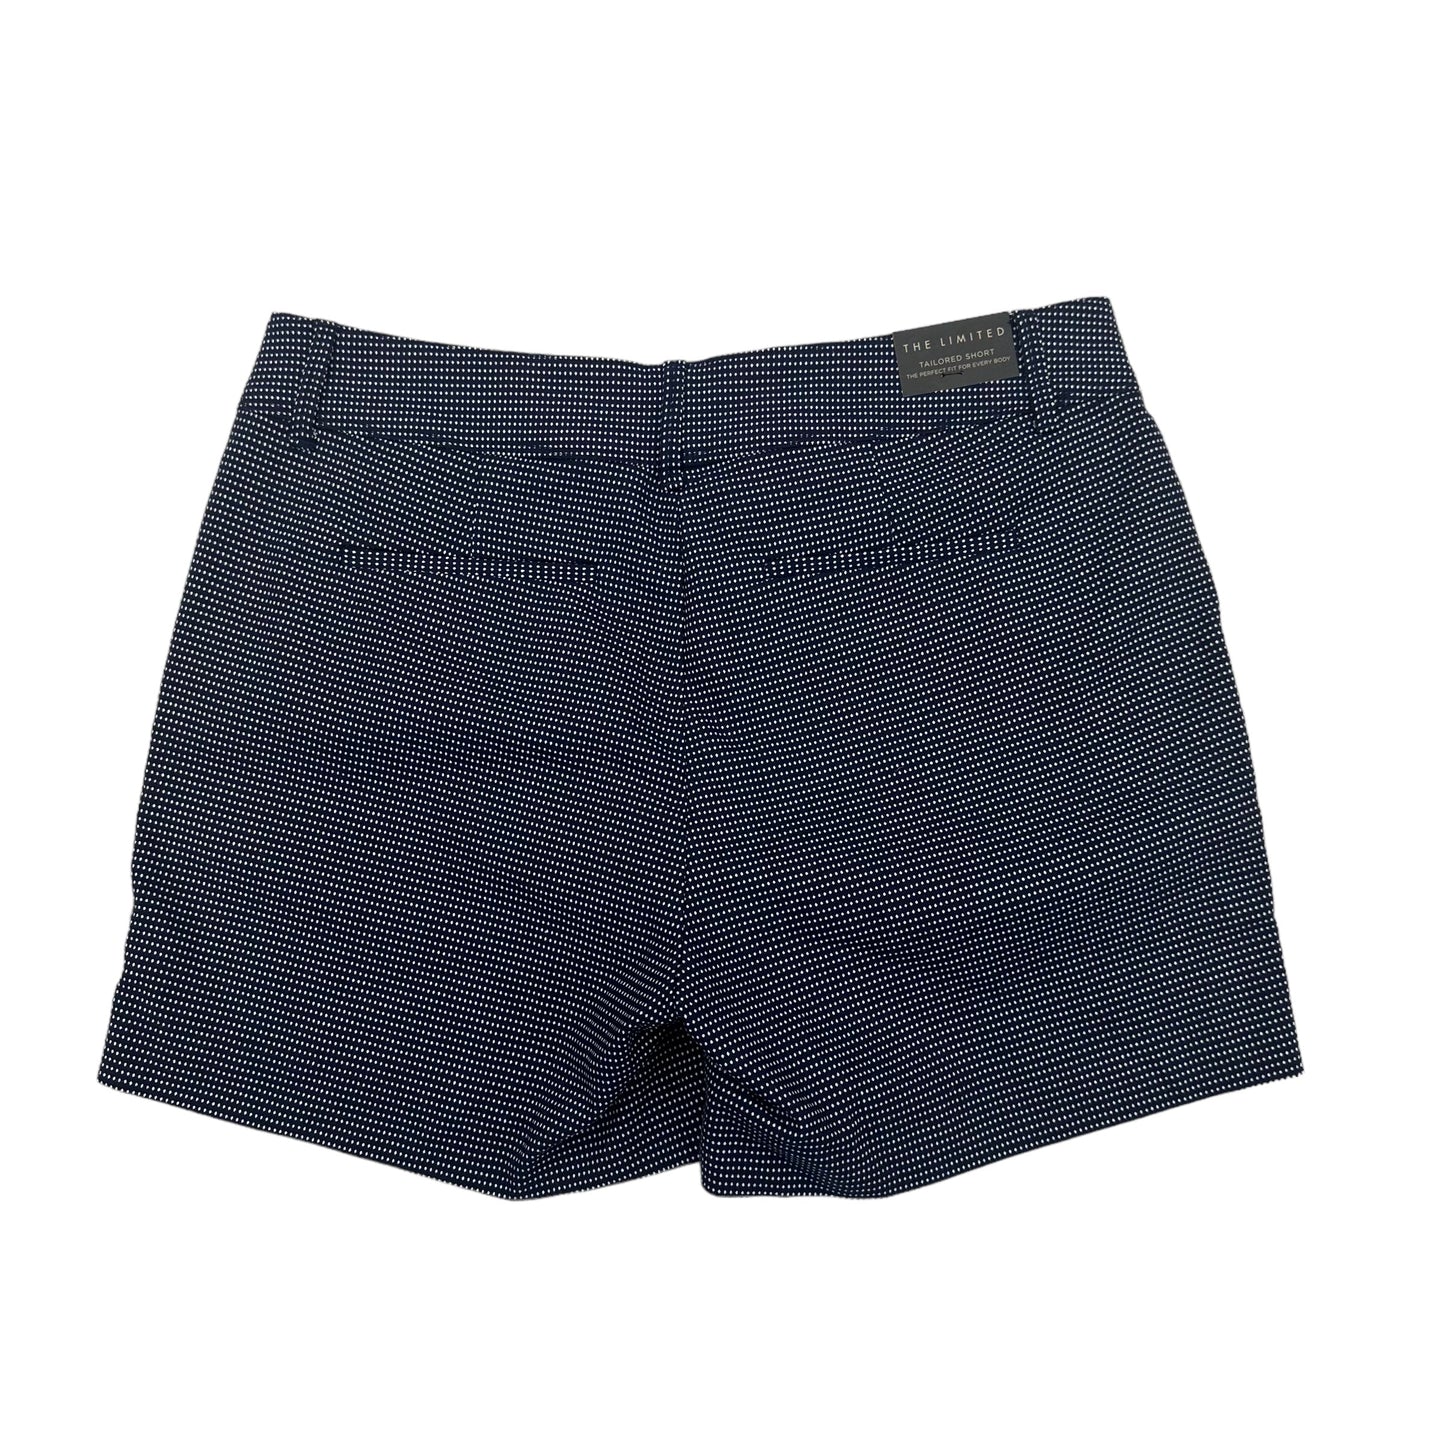 NAVY LIMITED SHORTS, Size 10